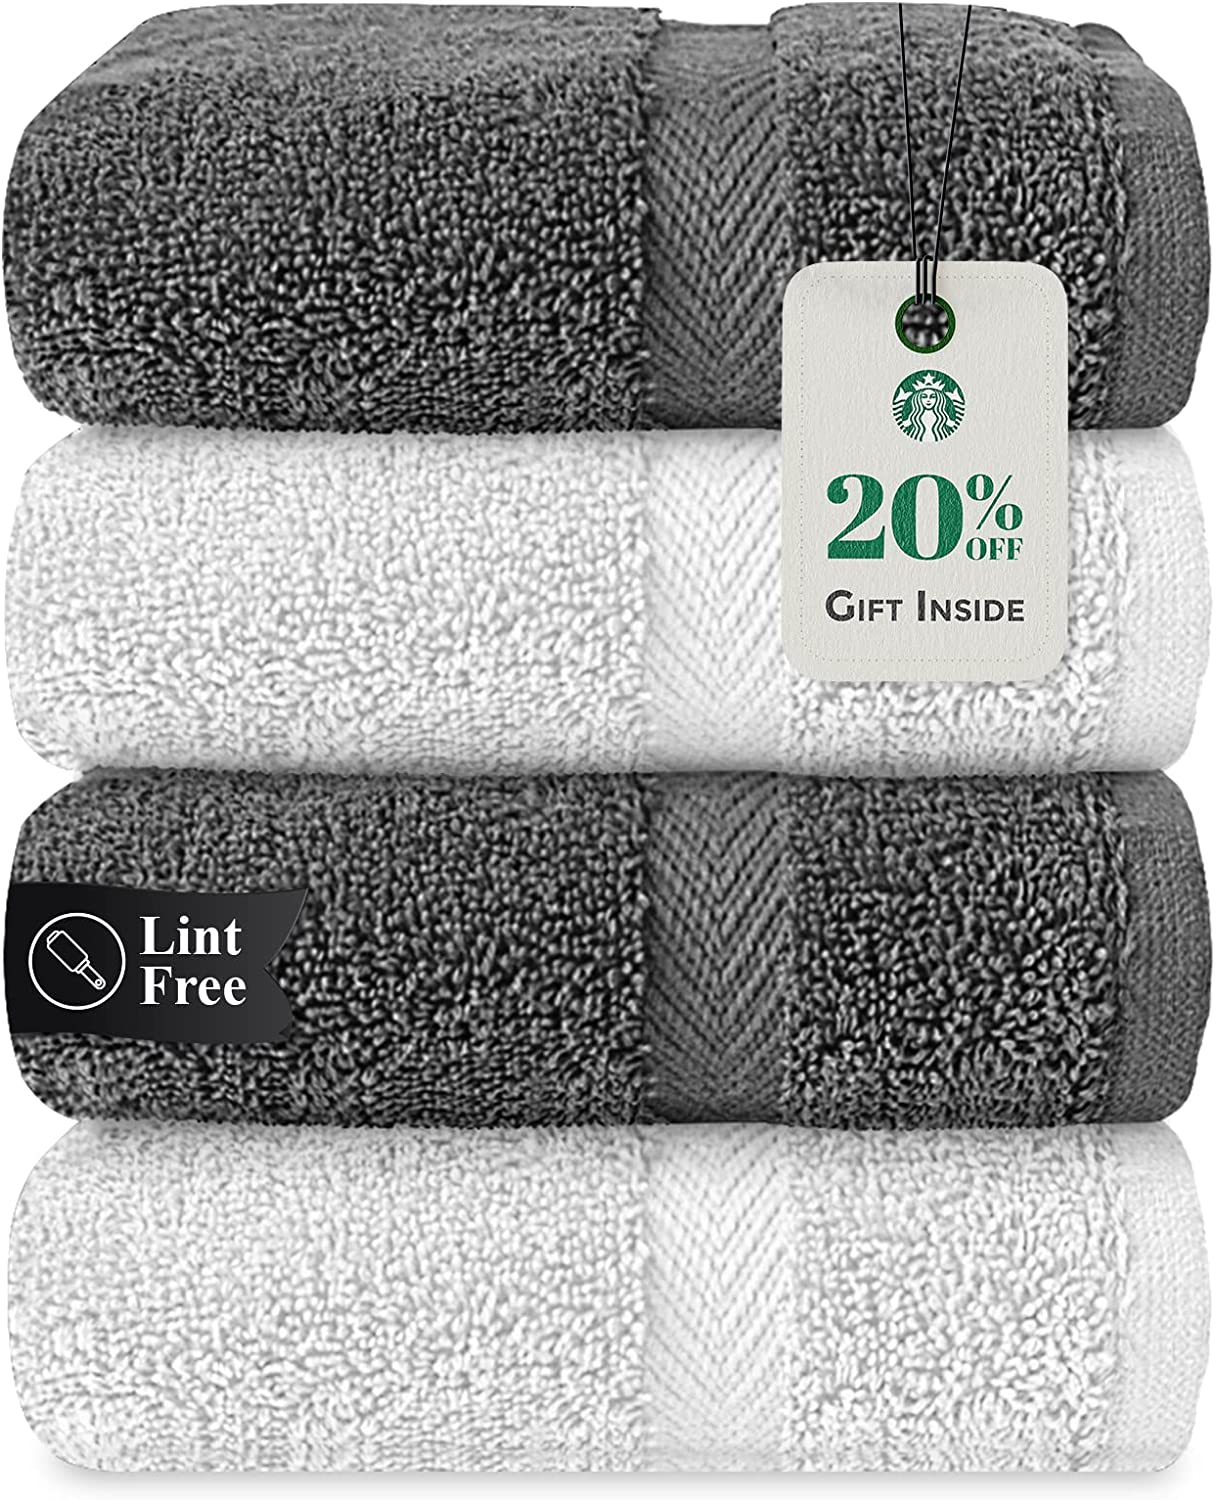 Stony Edge Towel Set, 4 Hand Towels, 100% Cotton, 600 GSM, Soft & Absorbent for Bathroom, Kitchen, Gym & Spa, White & Gray